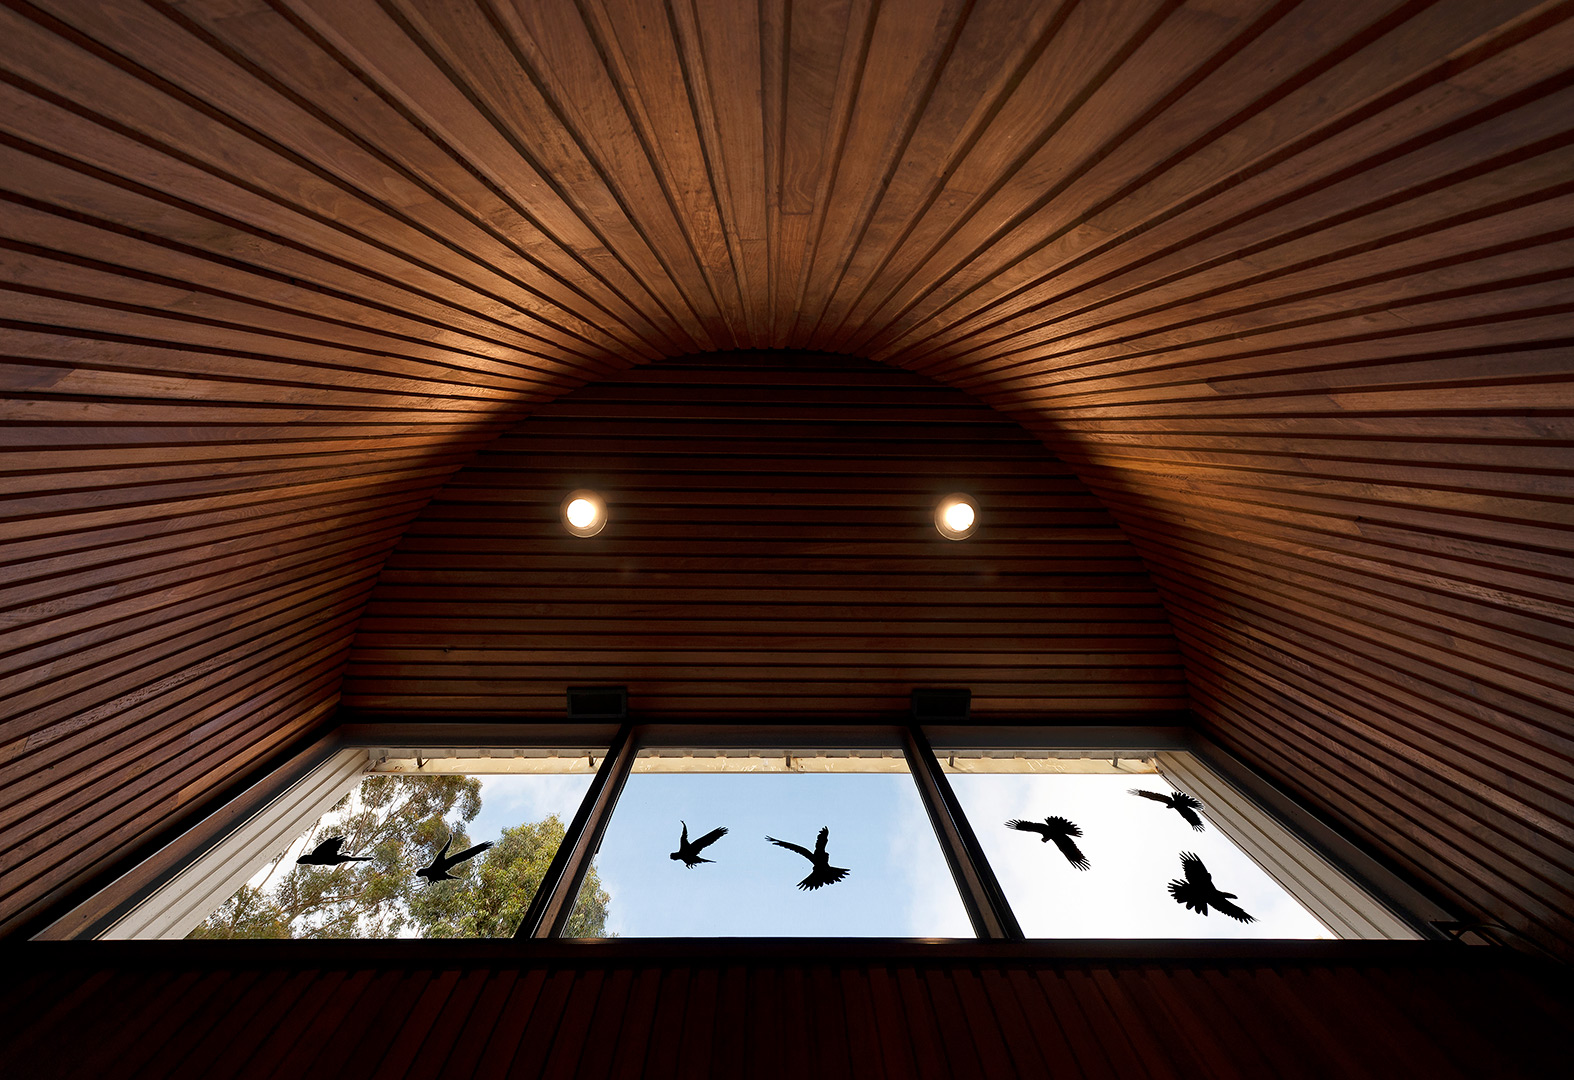 view of timber ceiling and timber clad walls in timber museum